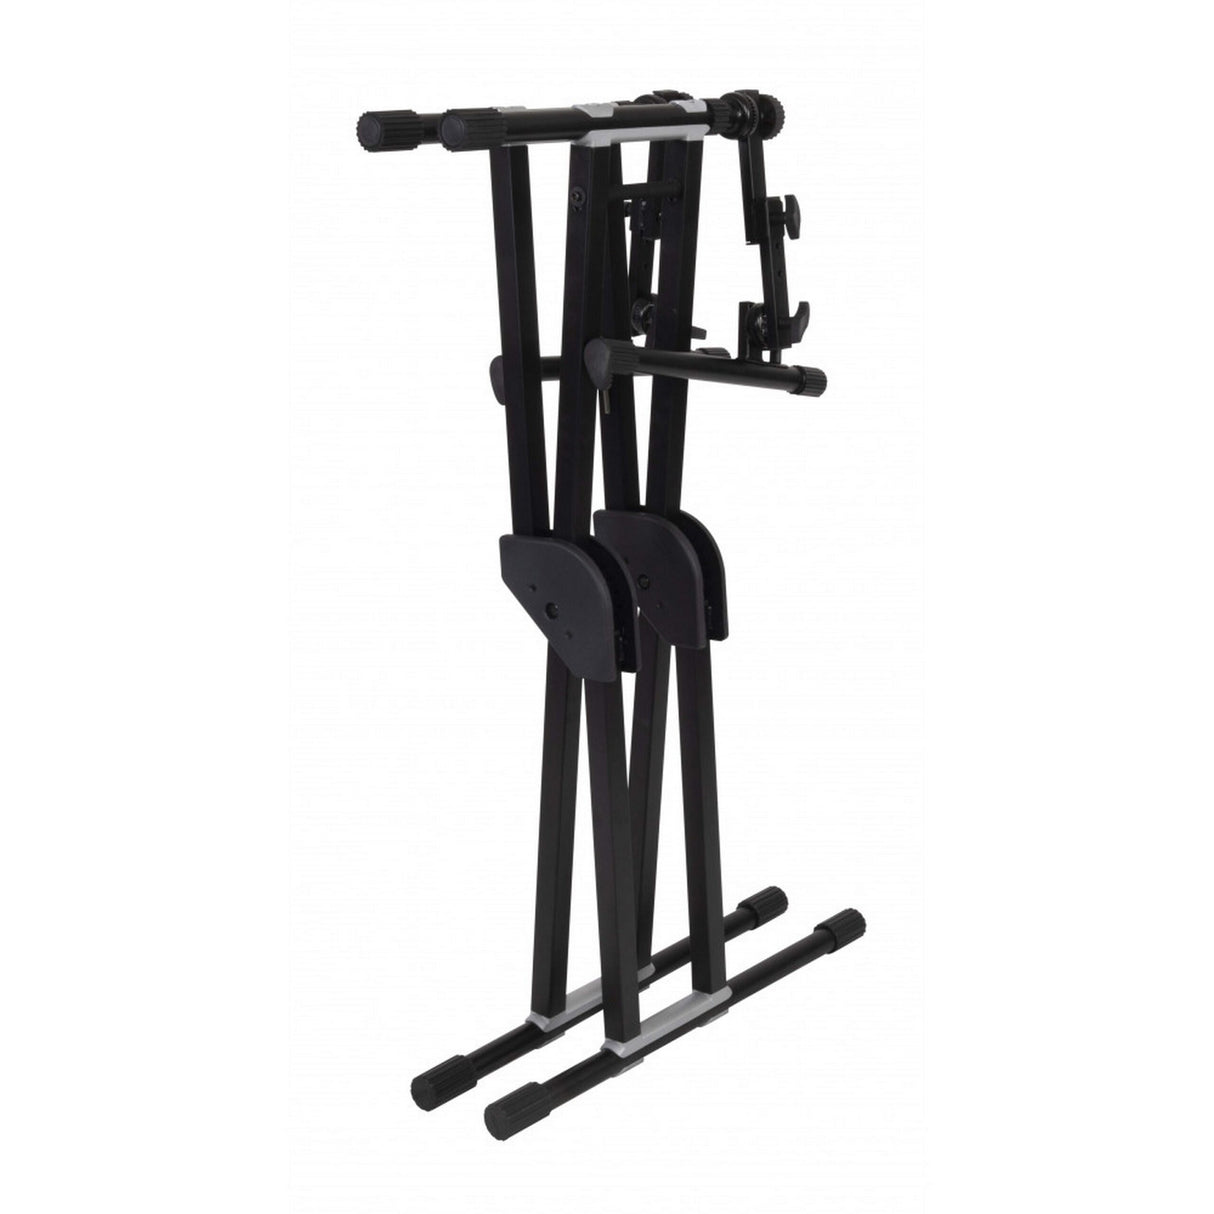 DieHard DHKS52 Double Brace Keyboard Stand with Second Tier Support